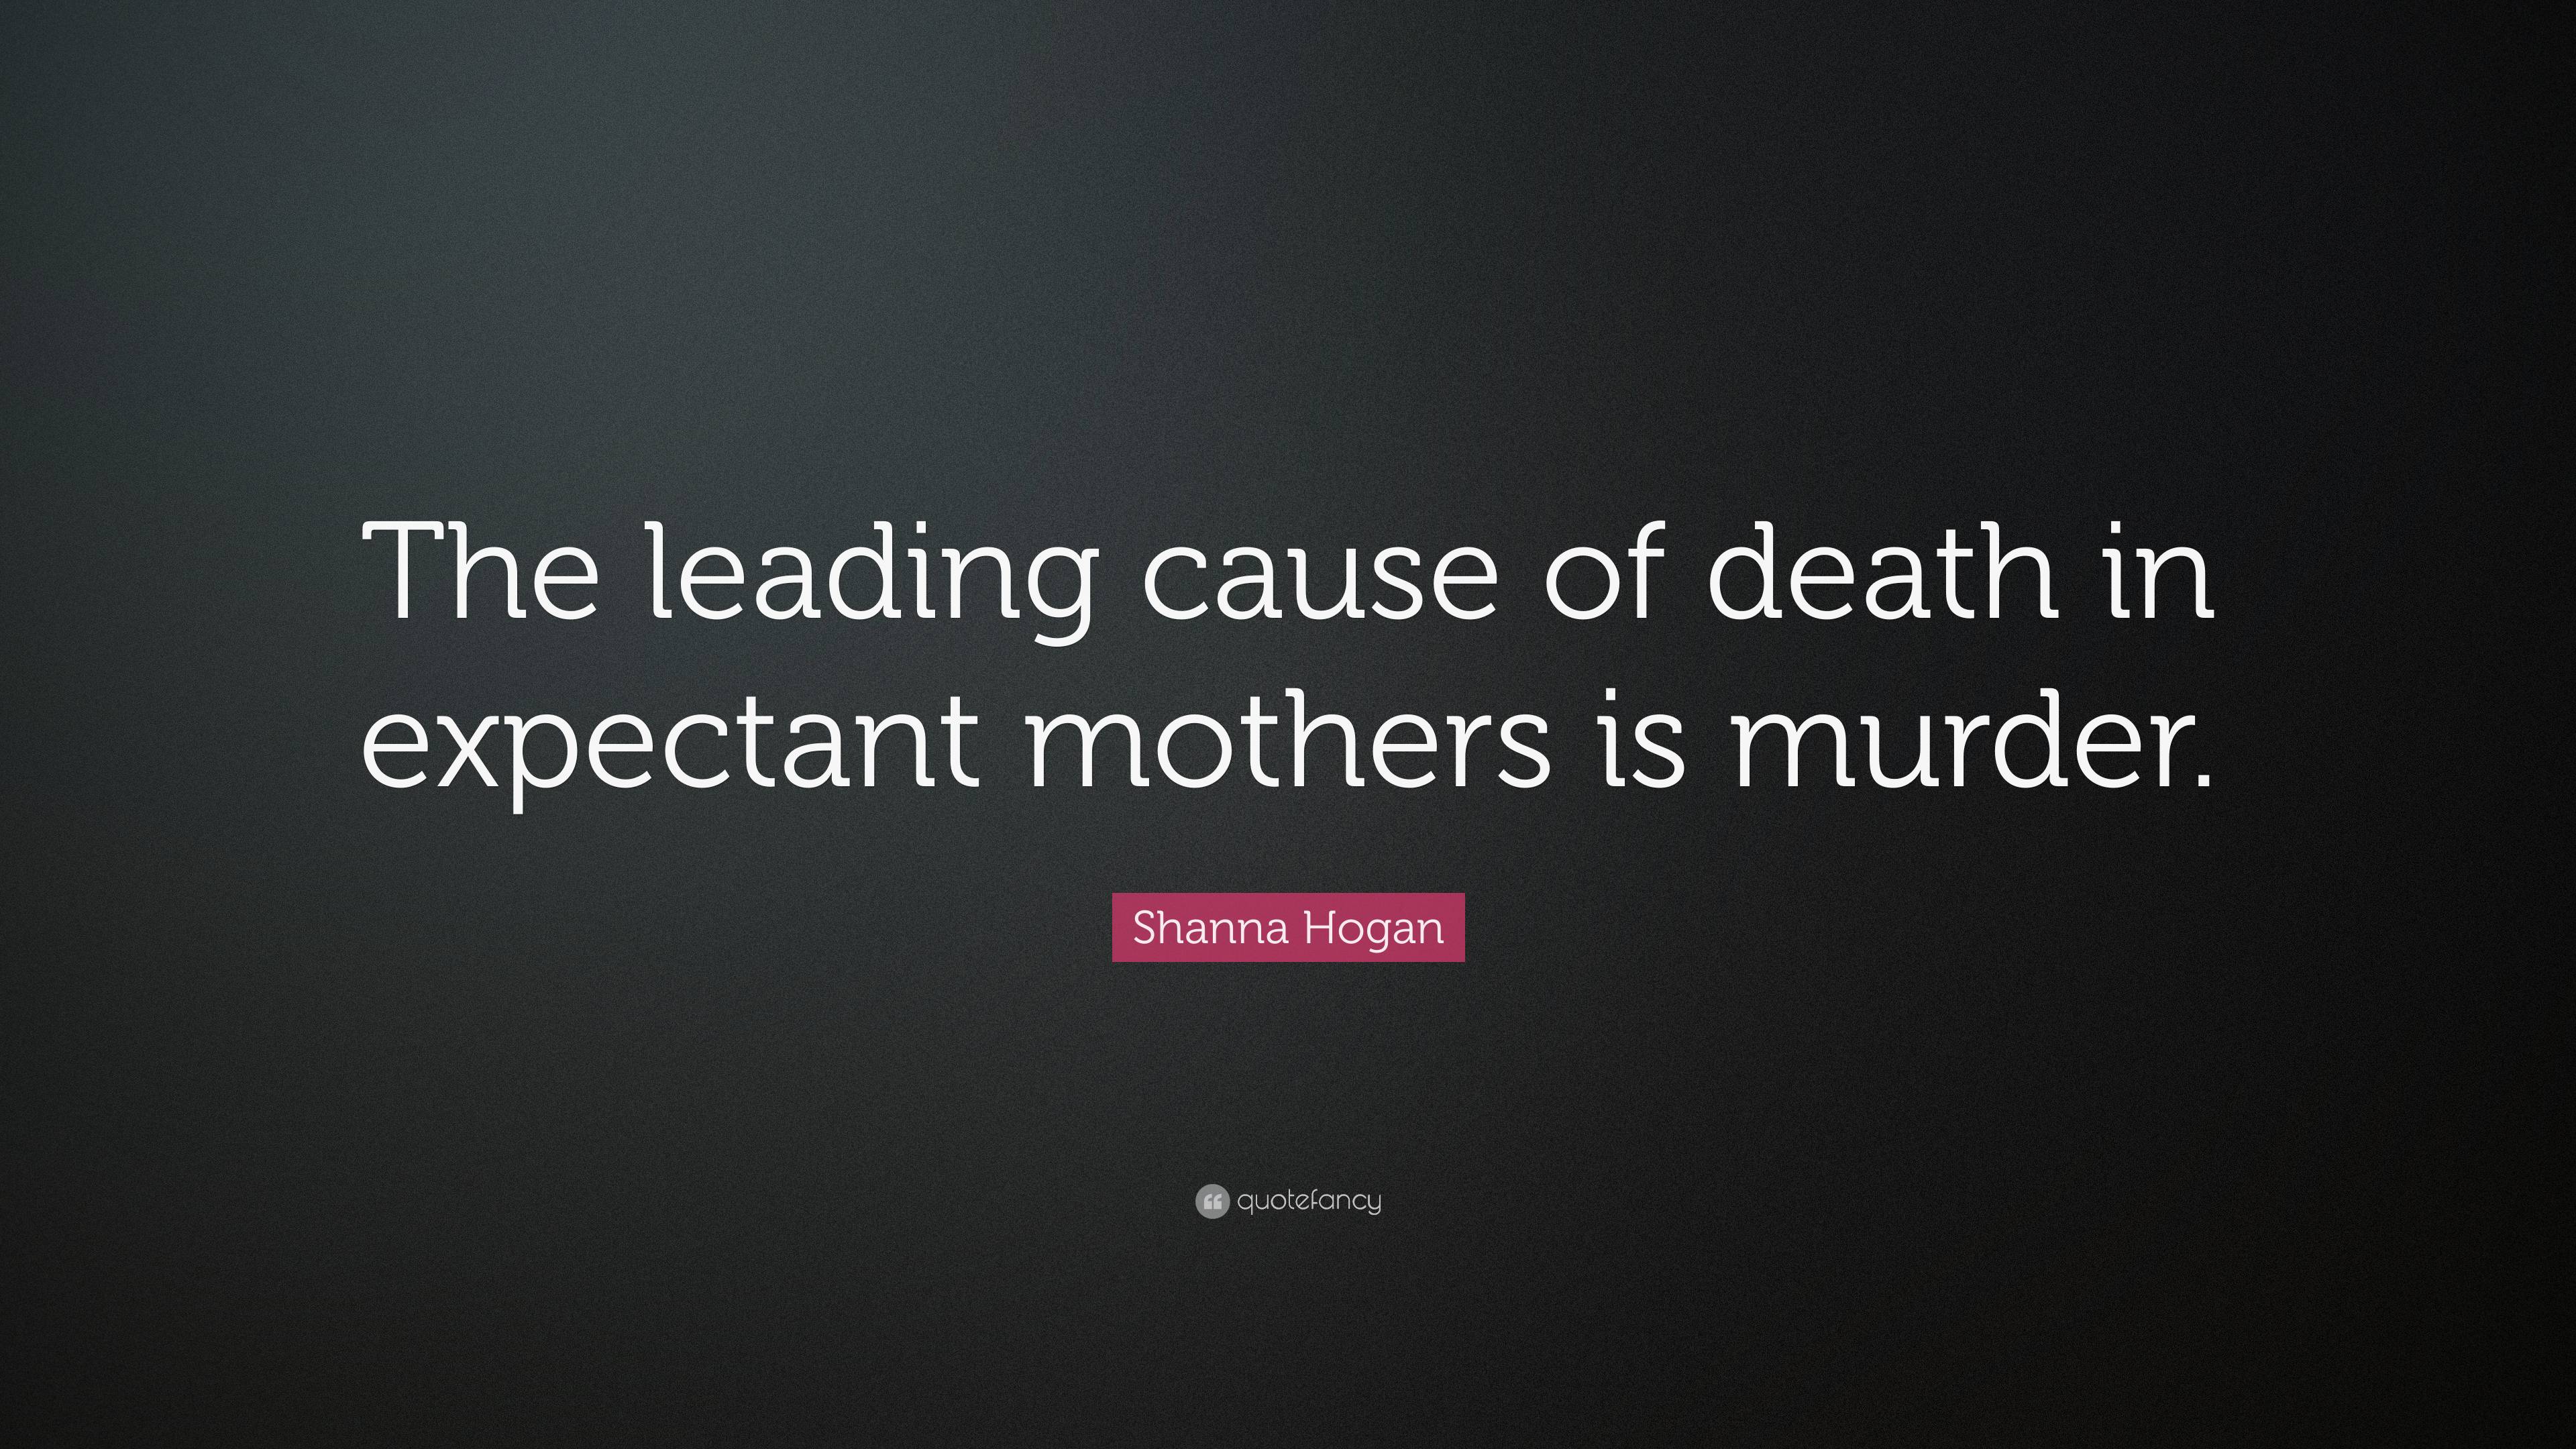 Shanna Hogan Quote: “The leading cause of death in expectant mothers is ...